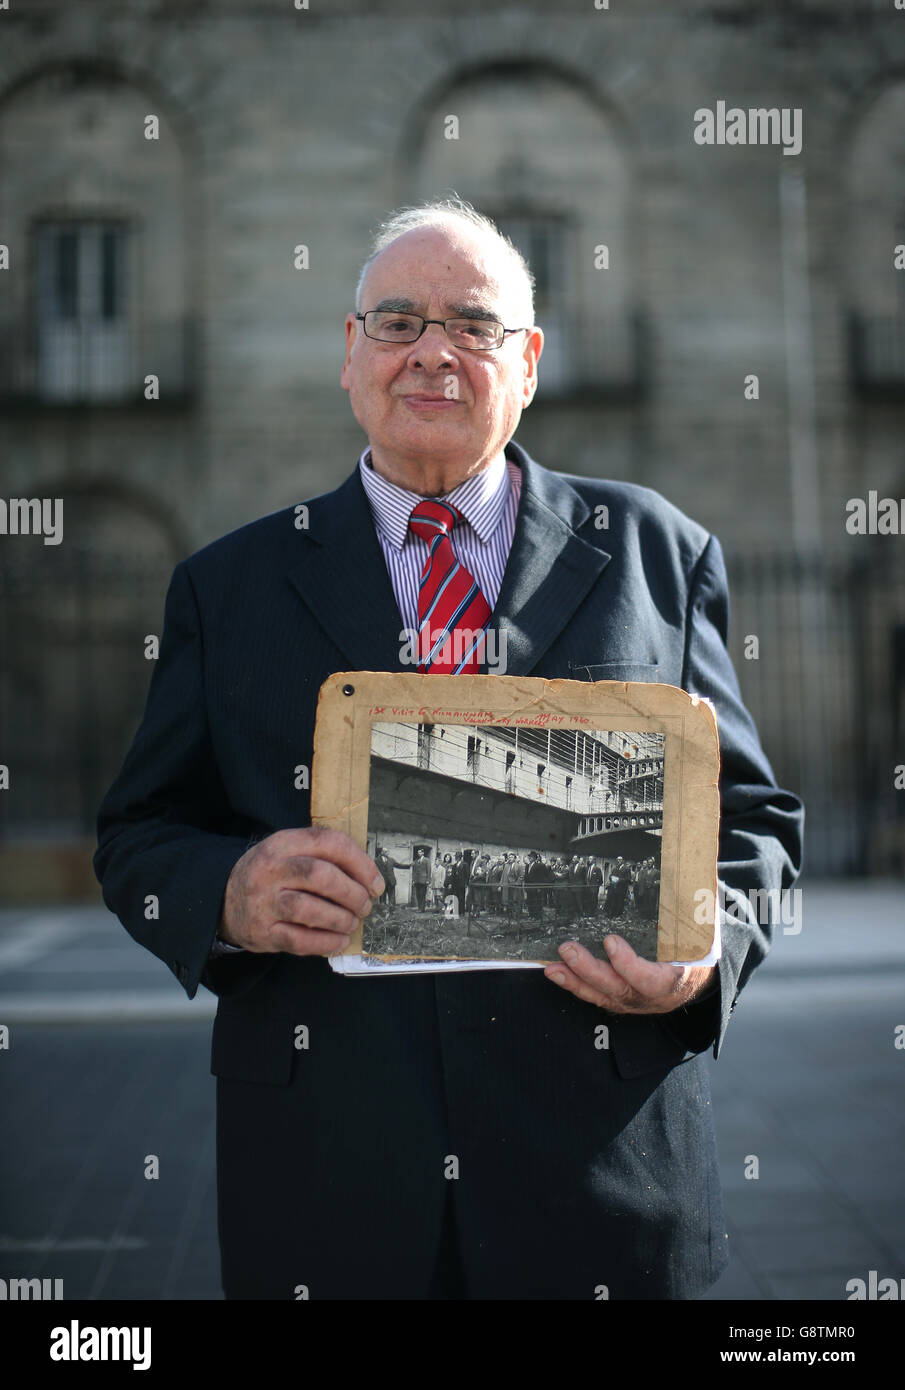 Damien Cassidy, chairman of the board of visitors in Kilmainham and one of the original trustees of the Kilmainham Gaol Restoration Committee set up in 1960, holds a photograph showing the voluntary workers' first visit to the gaol in May 1960, as he attends a special event in Dublin, Ireland, held to honour the Kilmainham Gaol Restoration Society, the volunteer group which saved the historic prison from dereliction in the 1960s. Stock Photo